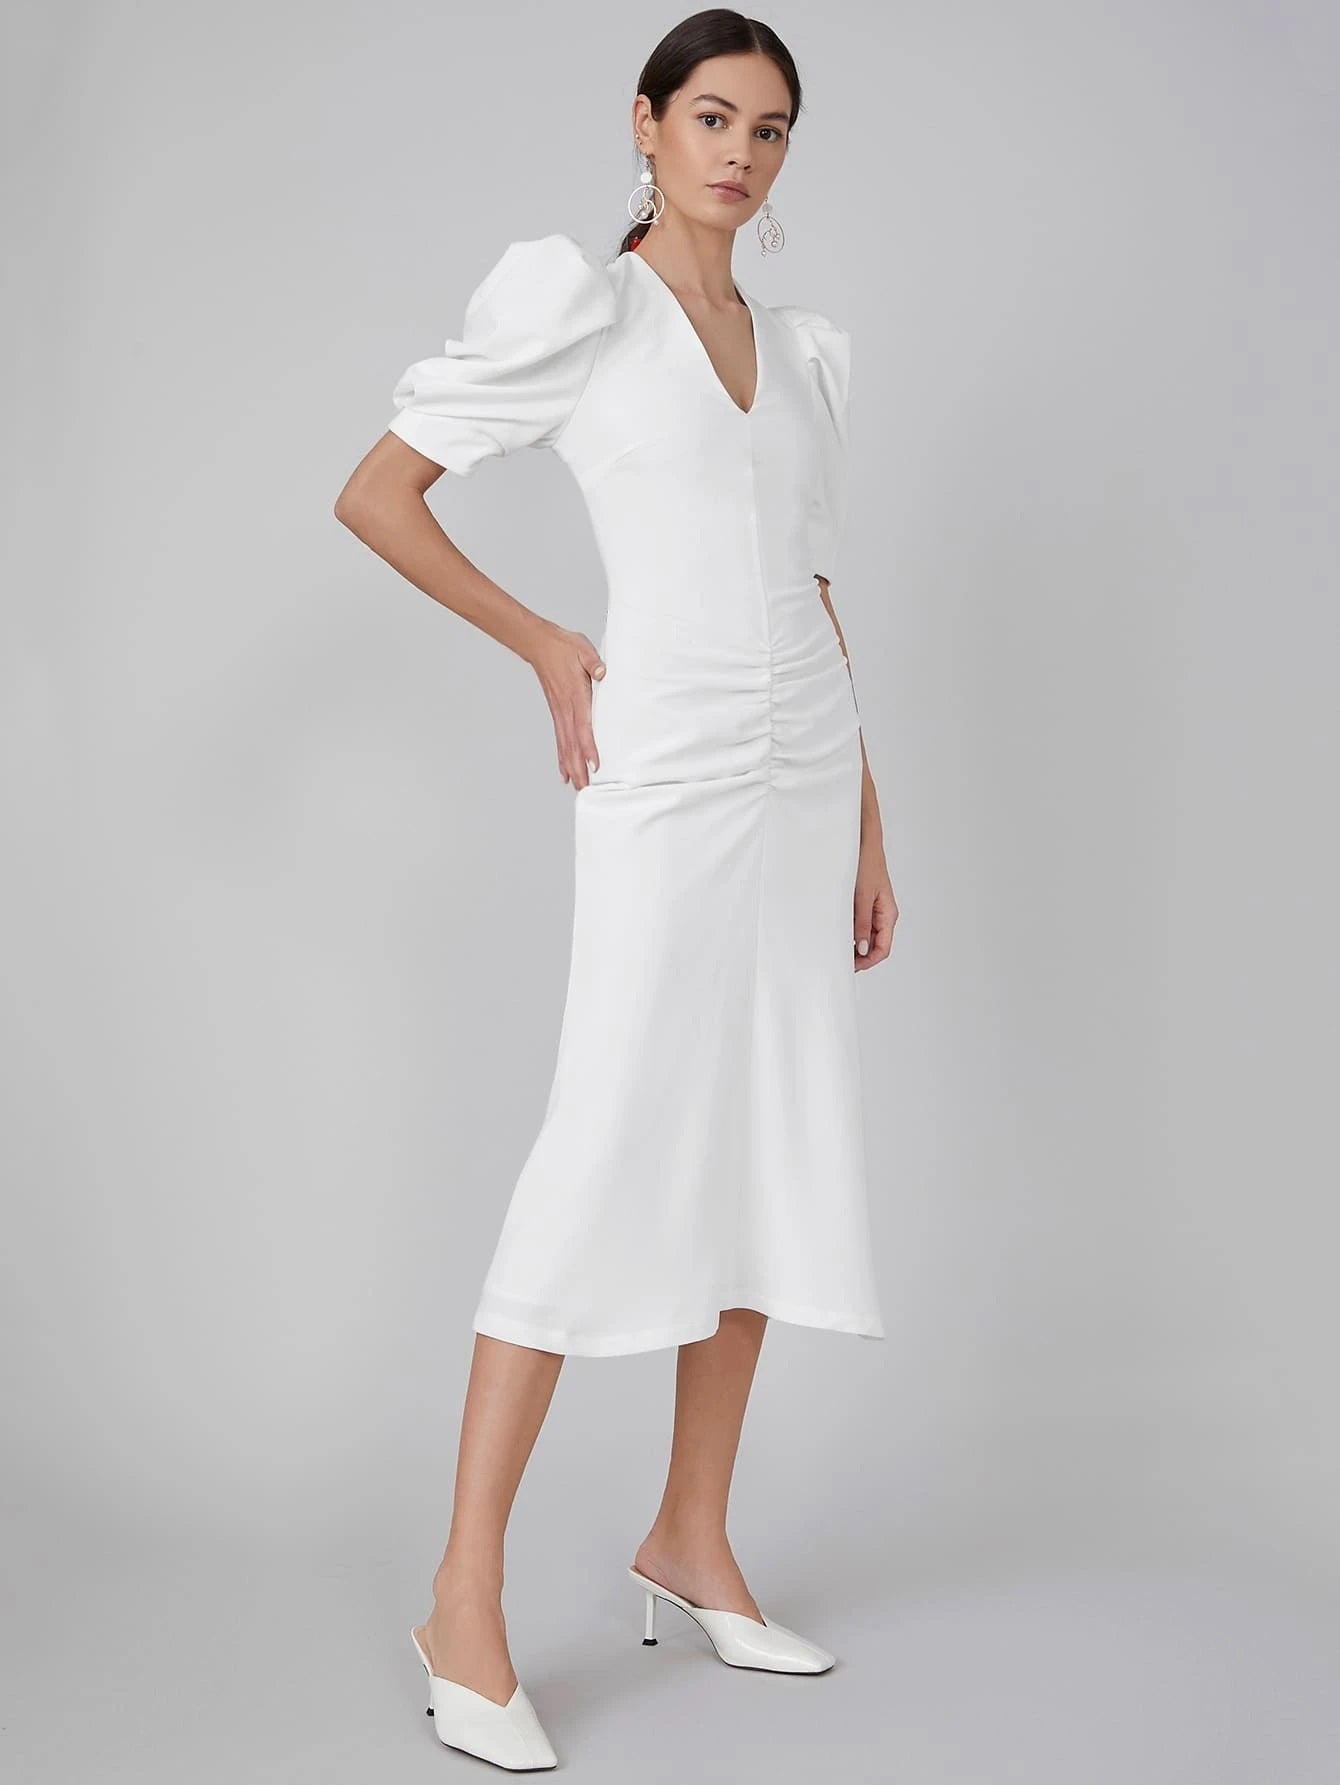 CM-ES119342 Women Elegant Seoul Style V-Neck Puff Sleeve Ruched Fitted Dress - White